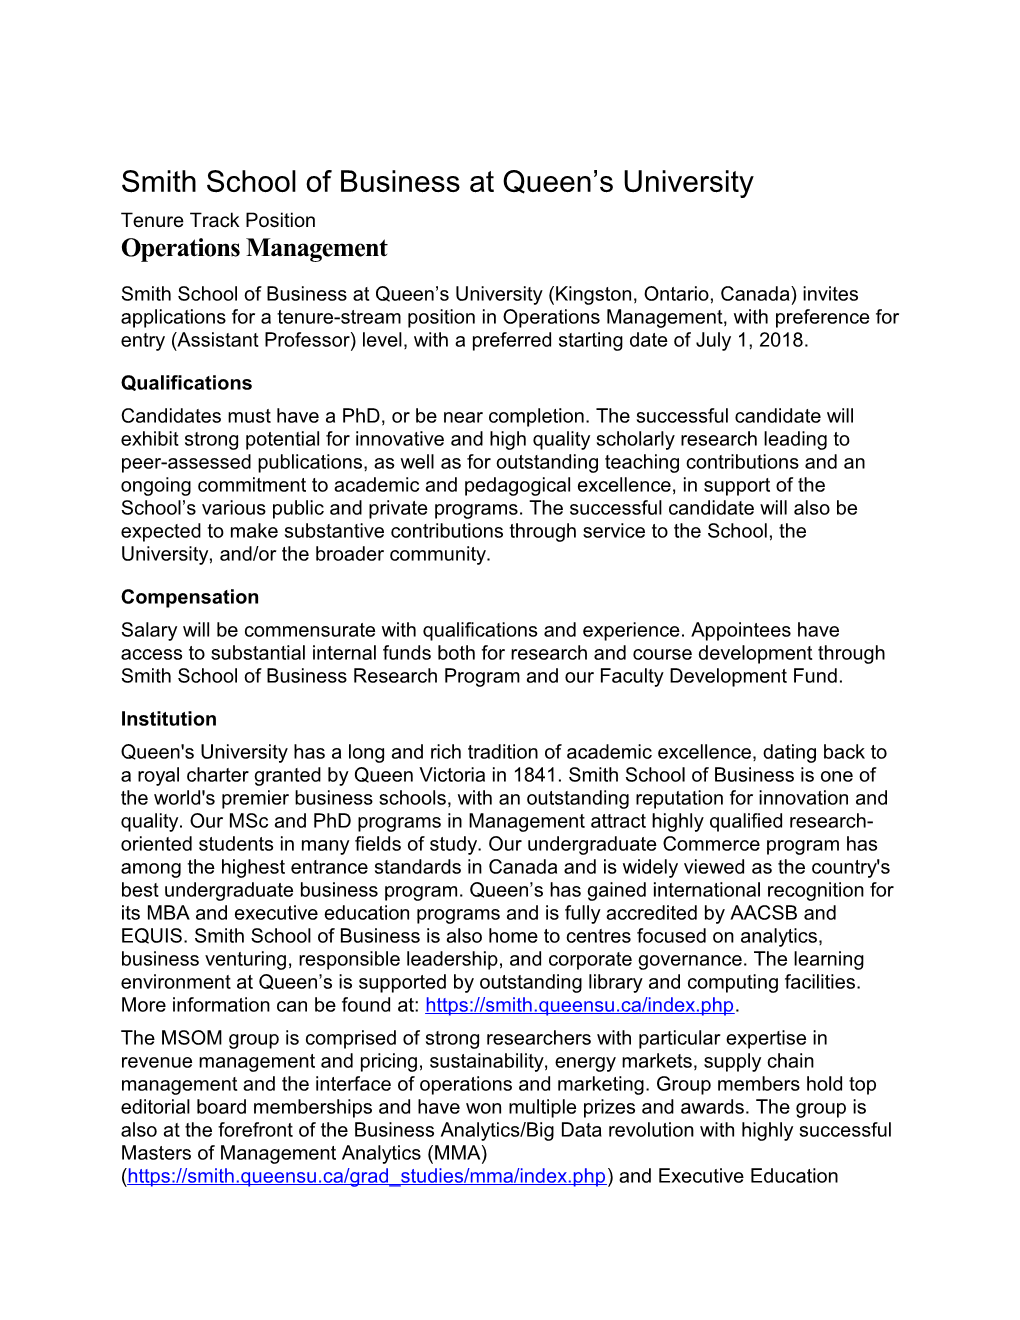 Smith School of Business at Queen S University